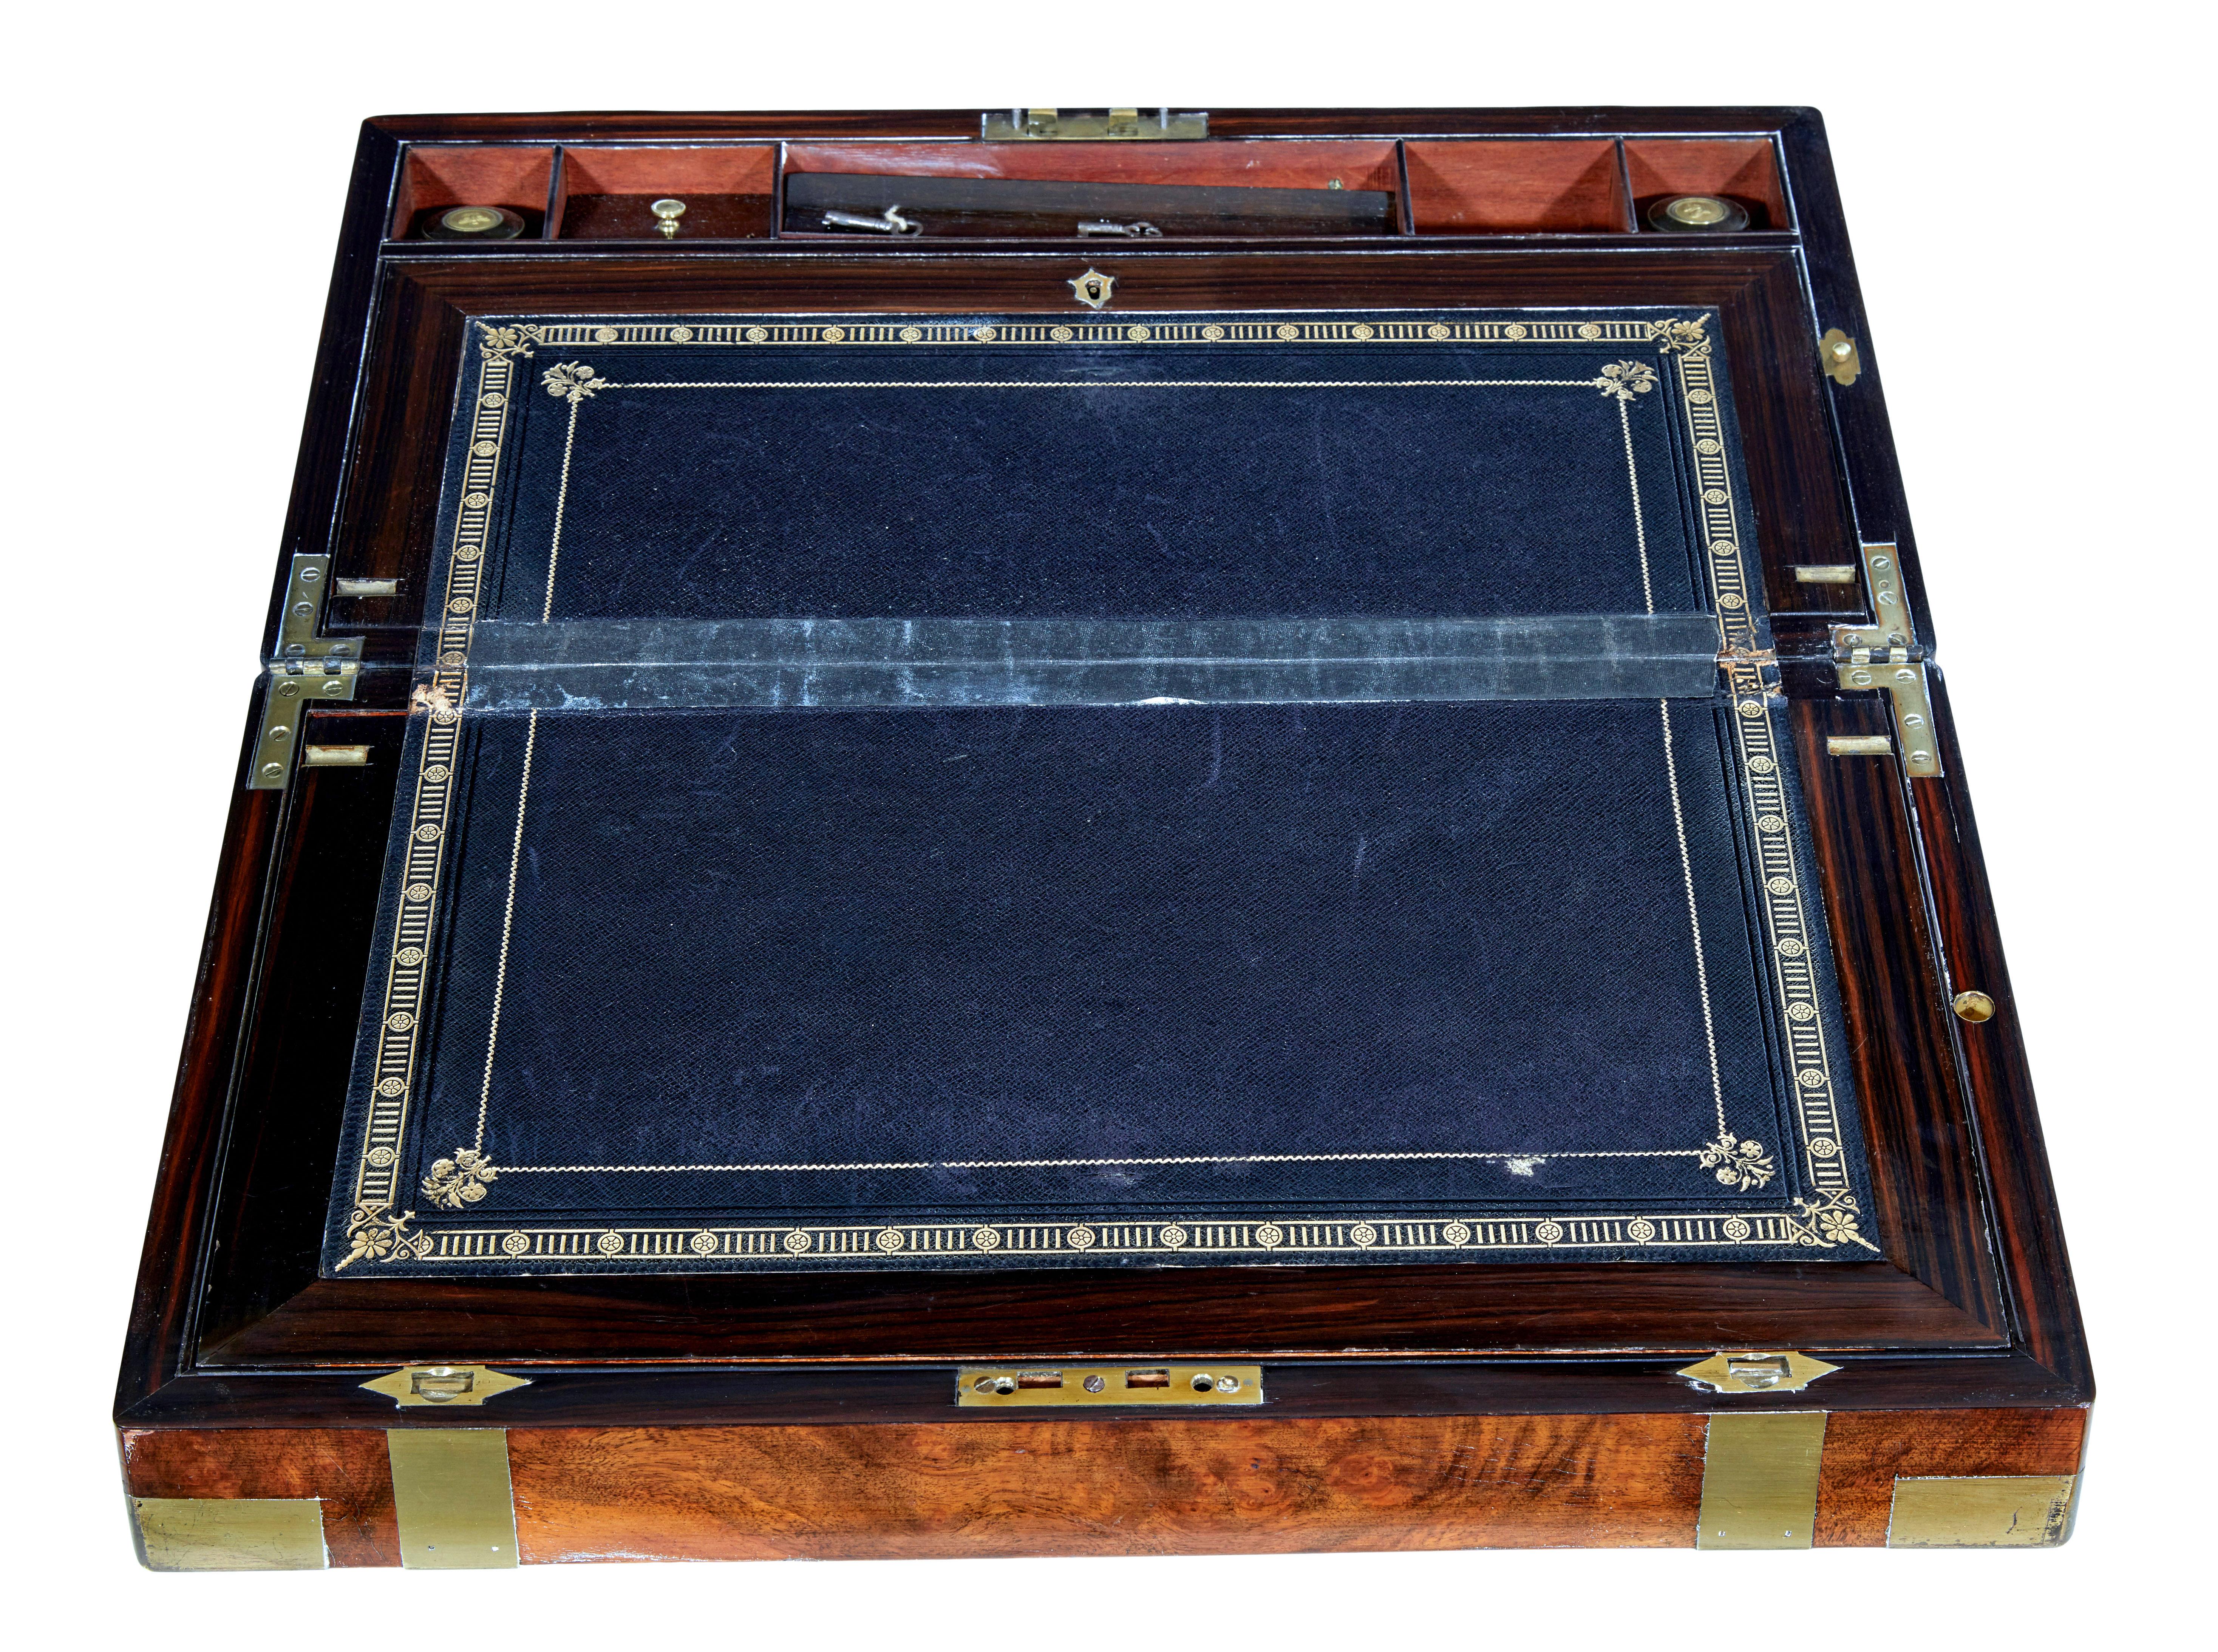 19th century brass bound mahogany writing slope circa 1890.

Good quality brass bound box slope made in mahogany.  Inscribed brass plaque shows that this was presented to a mr james street in 1902 for his service in the customs service.

Interior